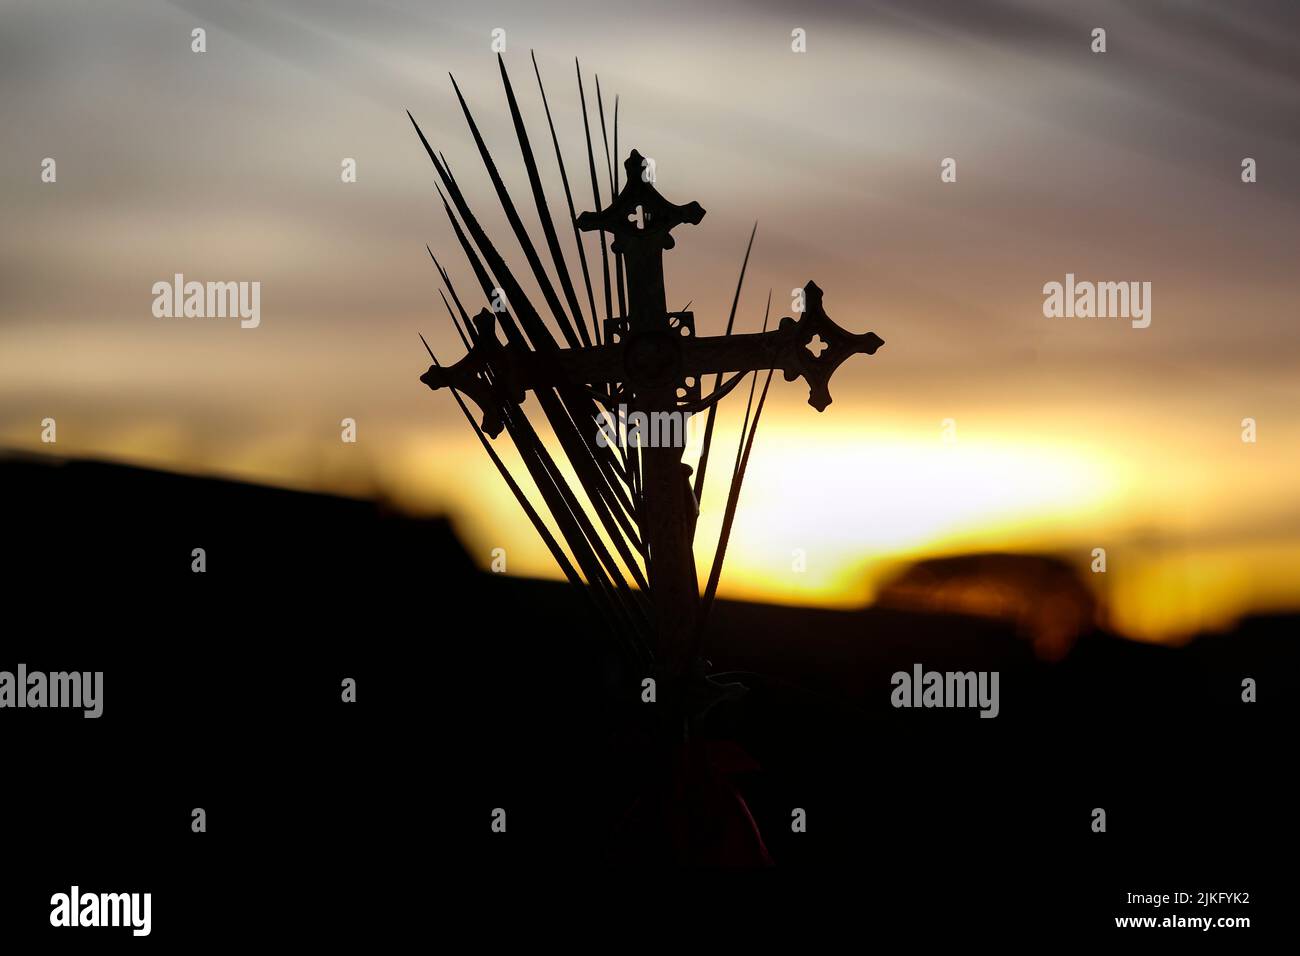 Holy Week. Processional cross and branches in beautiful sunset scenery. Traditional Catholic celebration Palm Sunday. Christian faith. Religious symbo Stock Photo